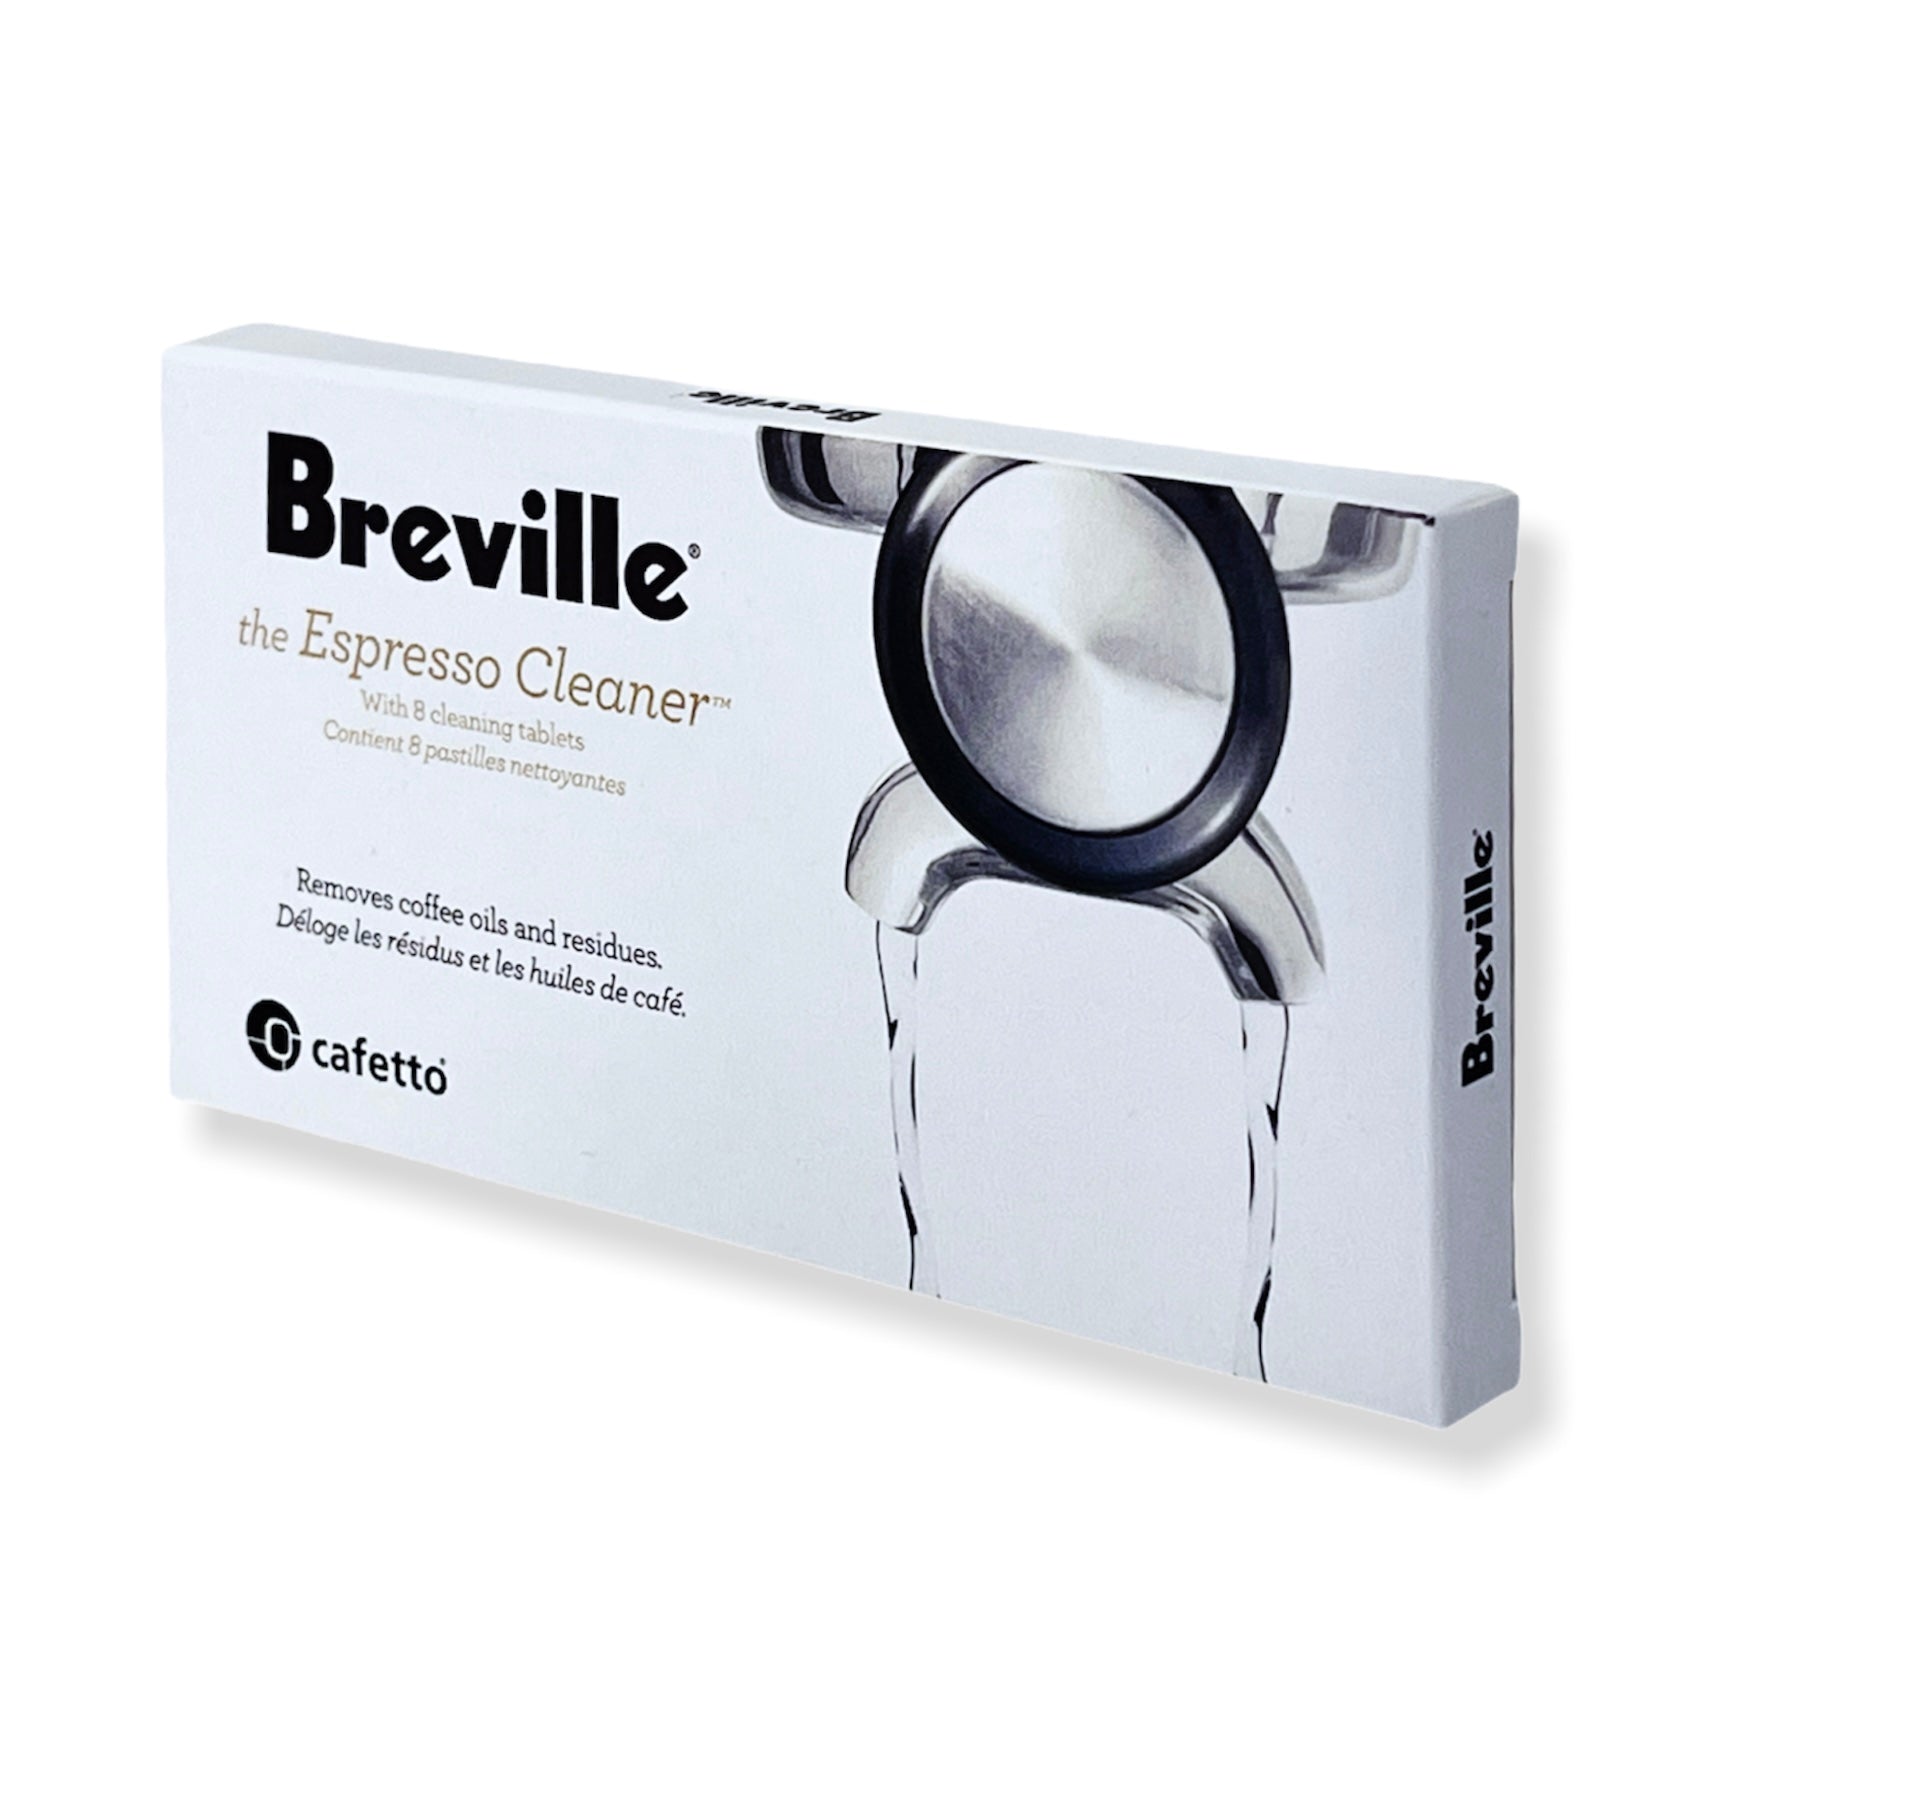 Breville Espresso cleaning tablets (8 tabs)